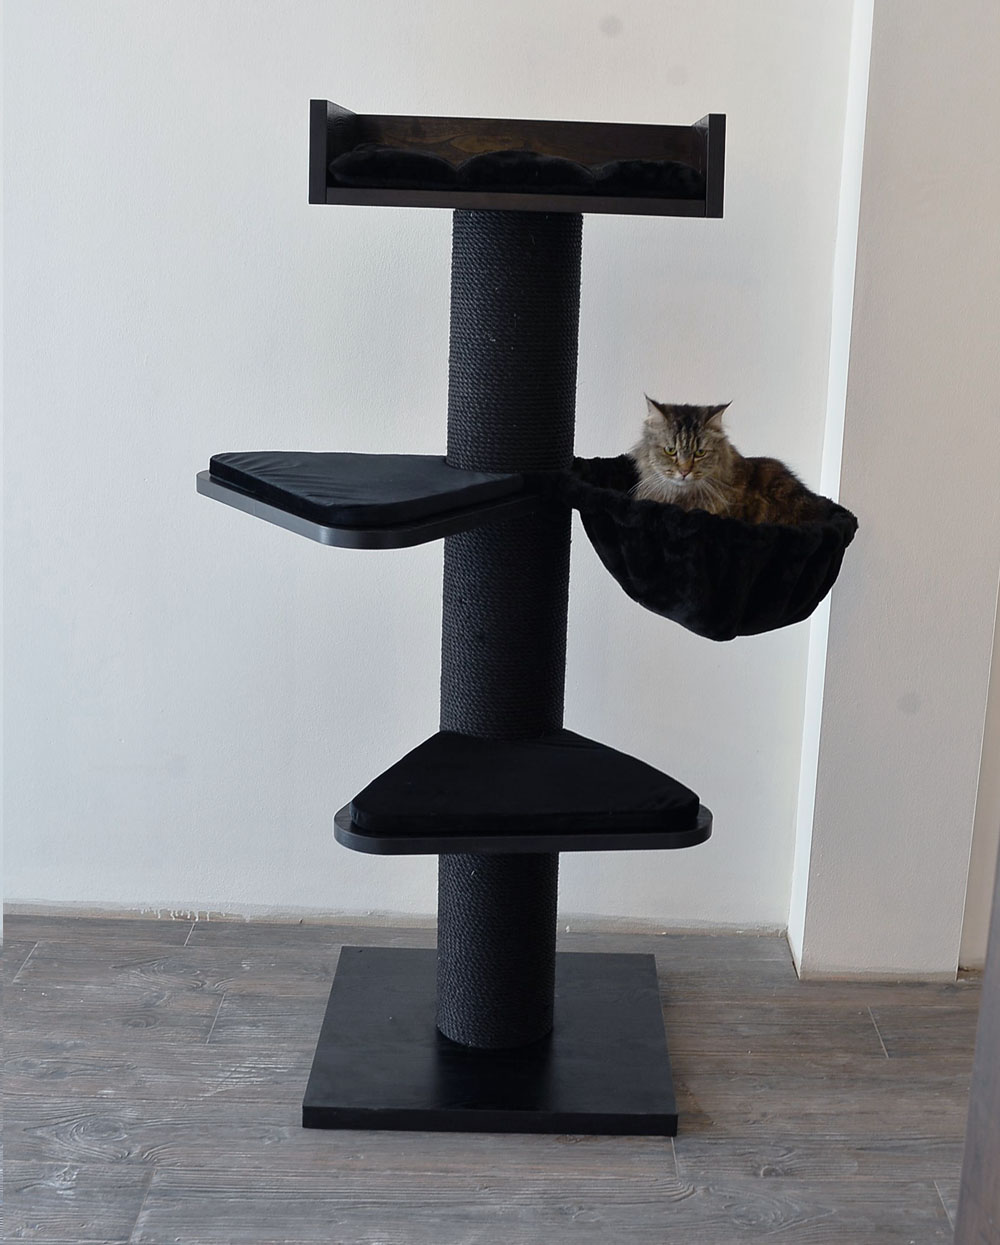 Safety First: Ensuring Your Maine Coon’s Cat Tree is Secure